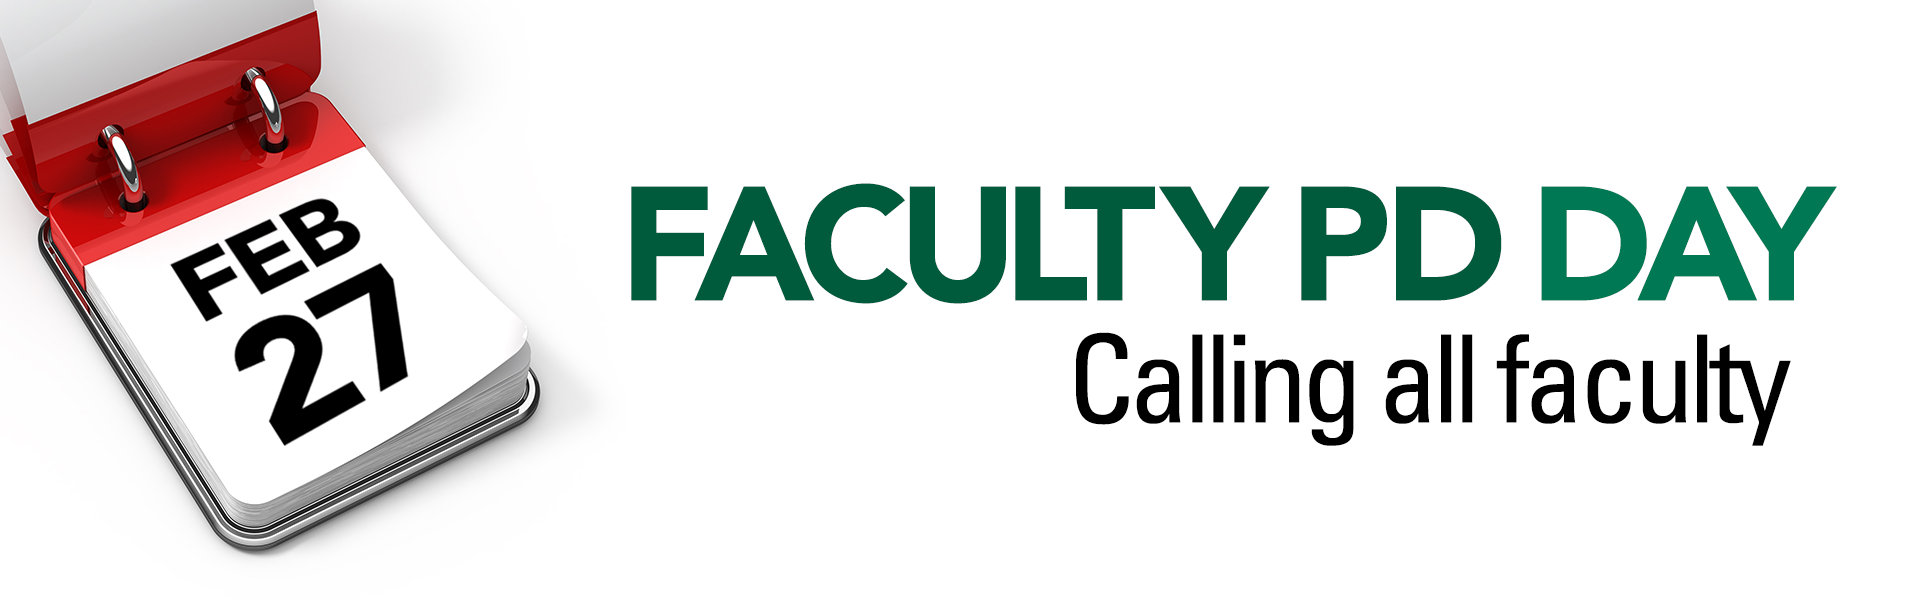 Faculty PD Day February 27th - Calling all faculty